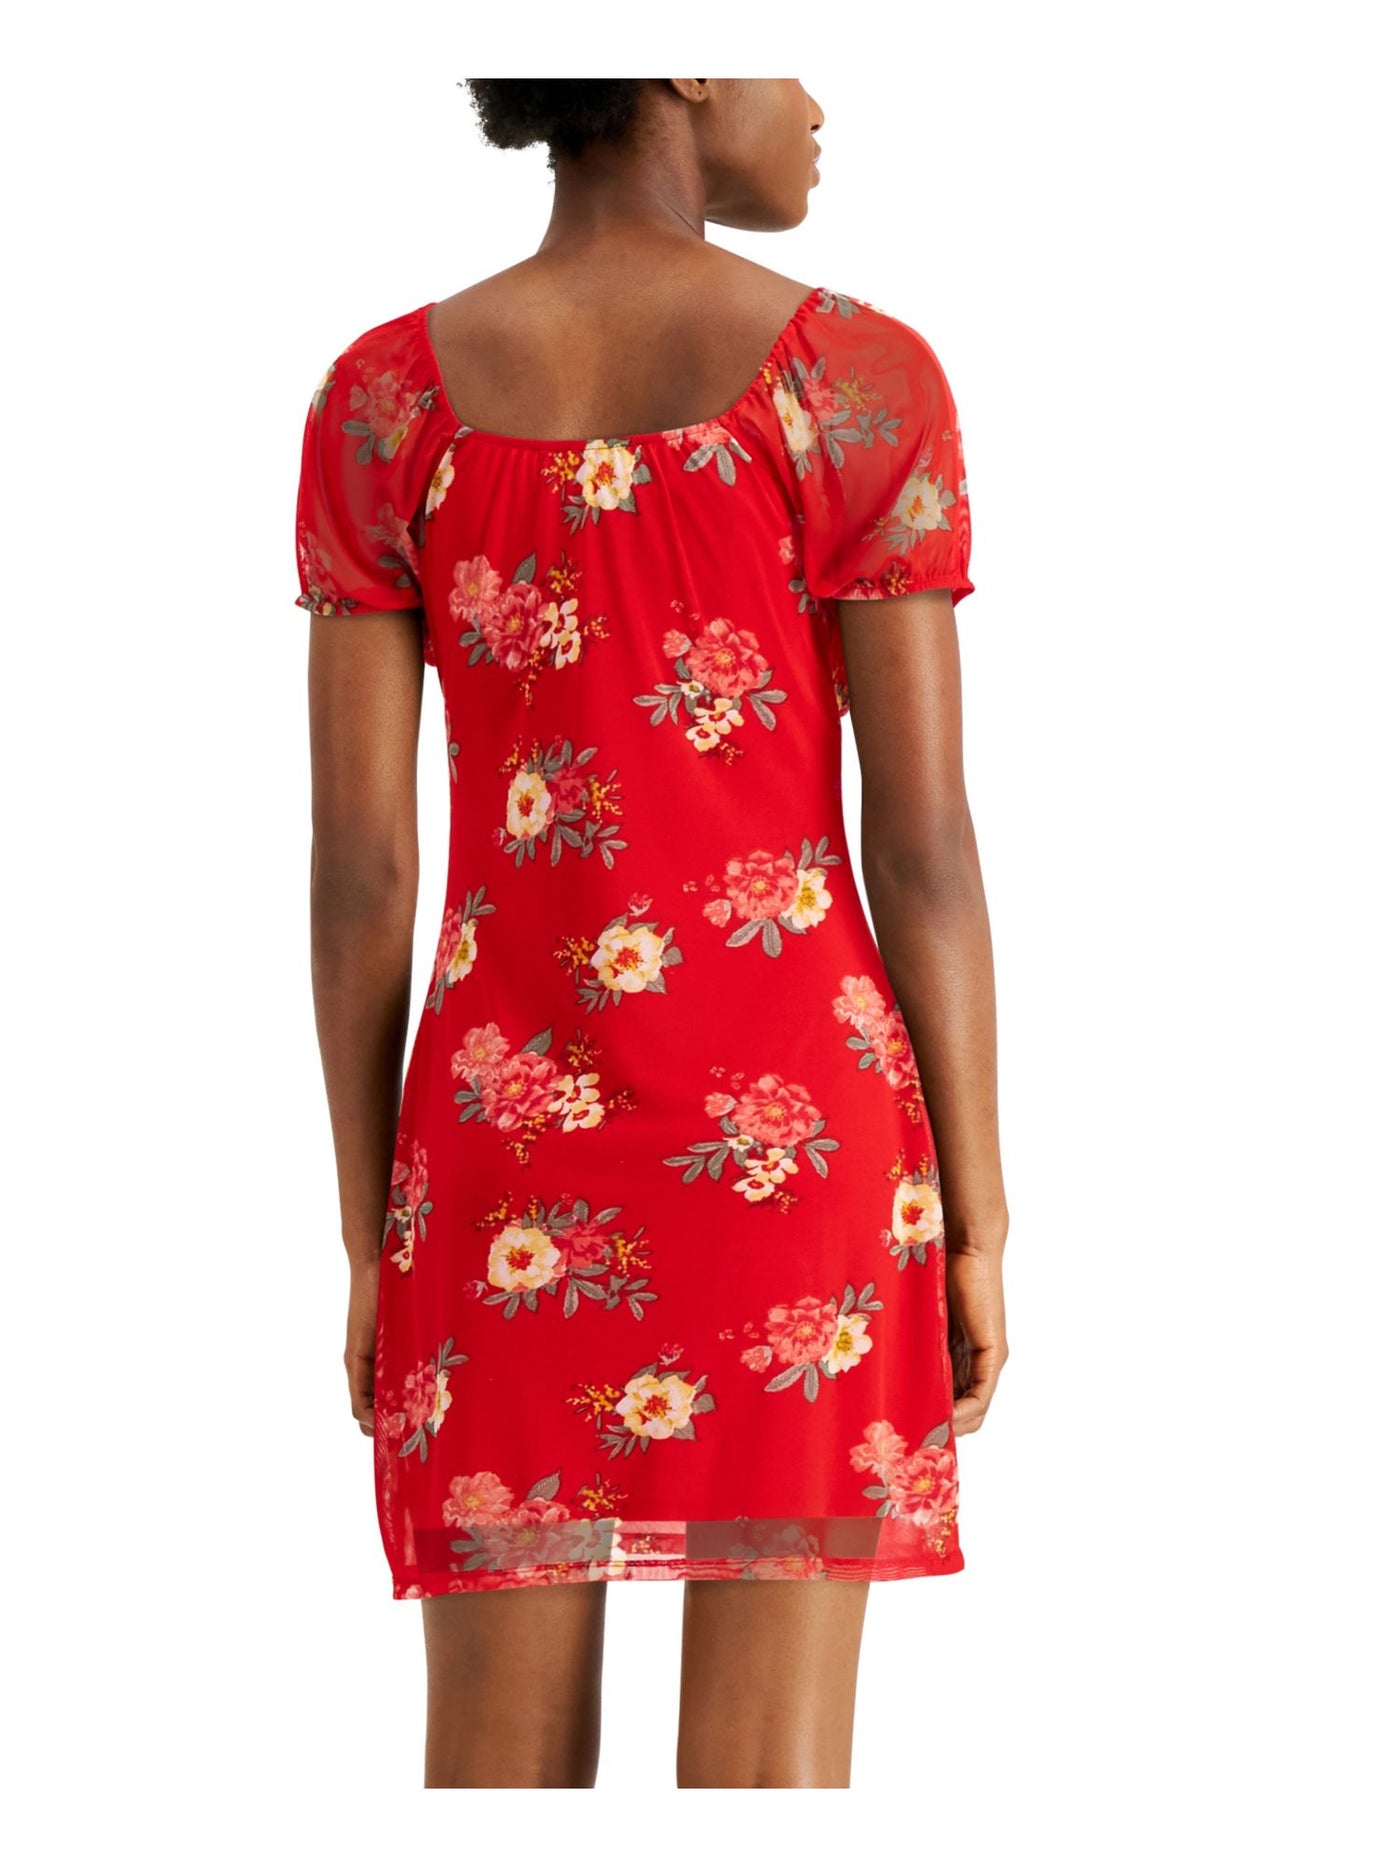 PLANET GOLD Womens Red Tie Front Floral Short Sleeve Above The Knee Fit + Flare Dress Juniors XS